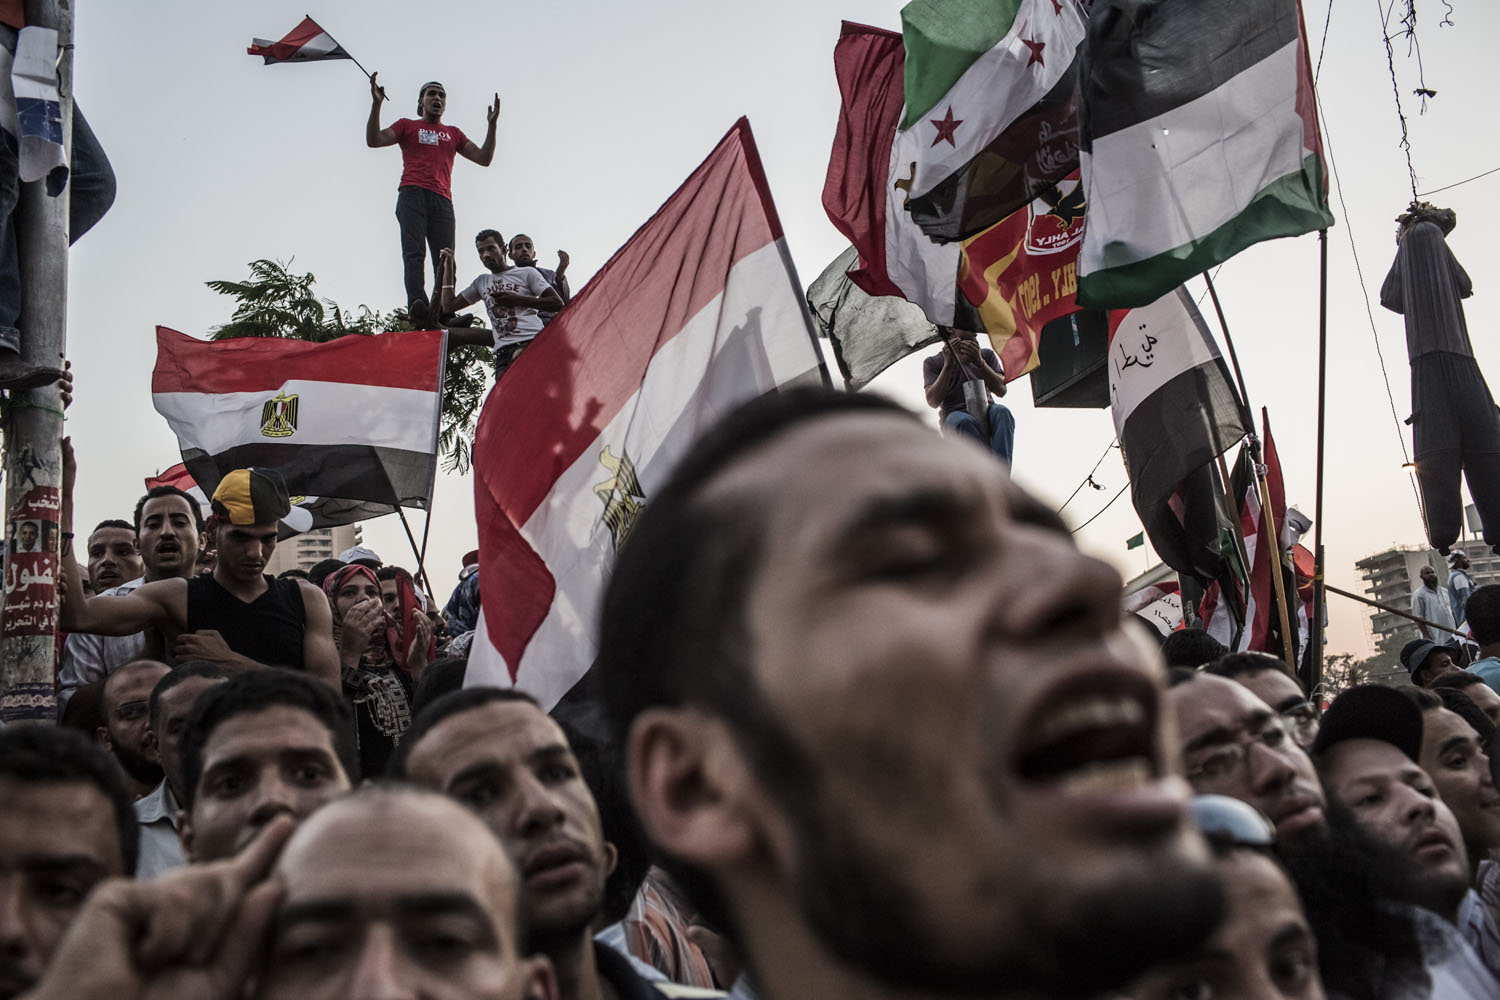 June 22, 2012, Cairo. Supporters of Mohamed Morsy, the Muslim Brotherhood's  candidate, protest against Egypt's military rulers in Tahrir Square.